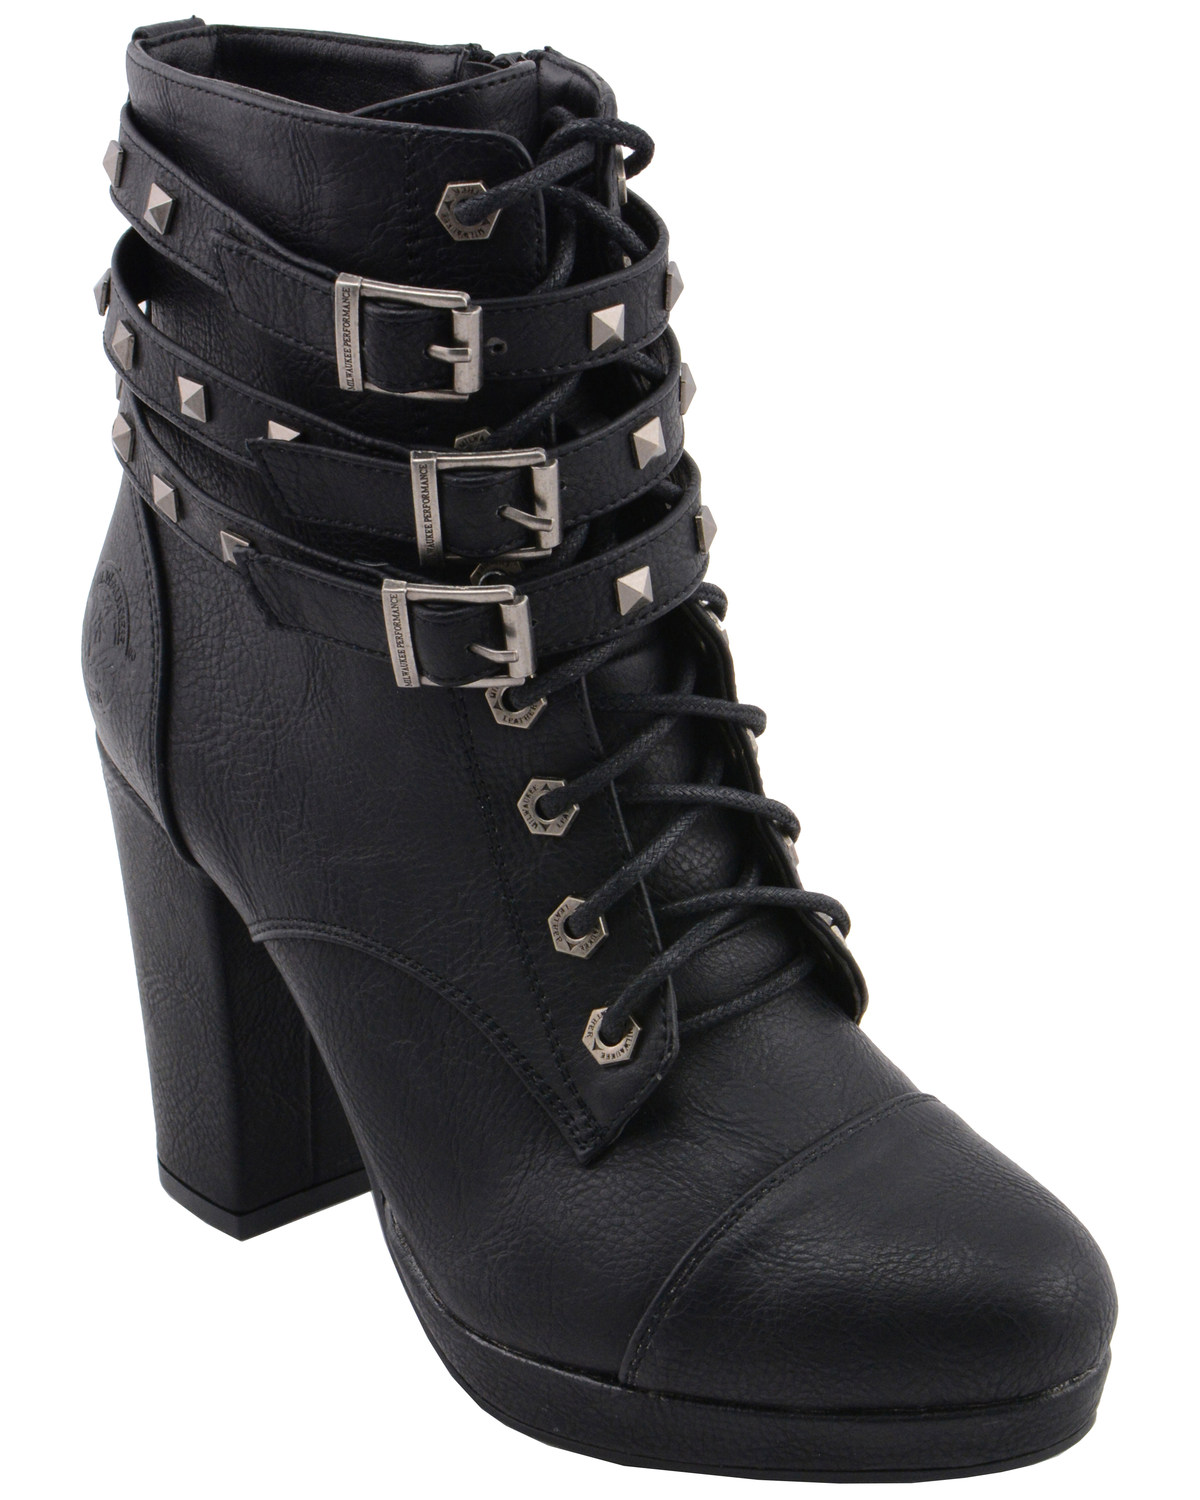 Milwaukee Leather Women's Studded Buckle Strap Laced Boots - Round Toe